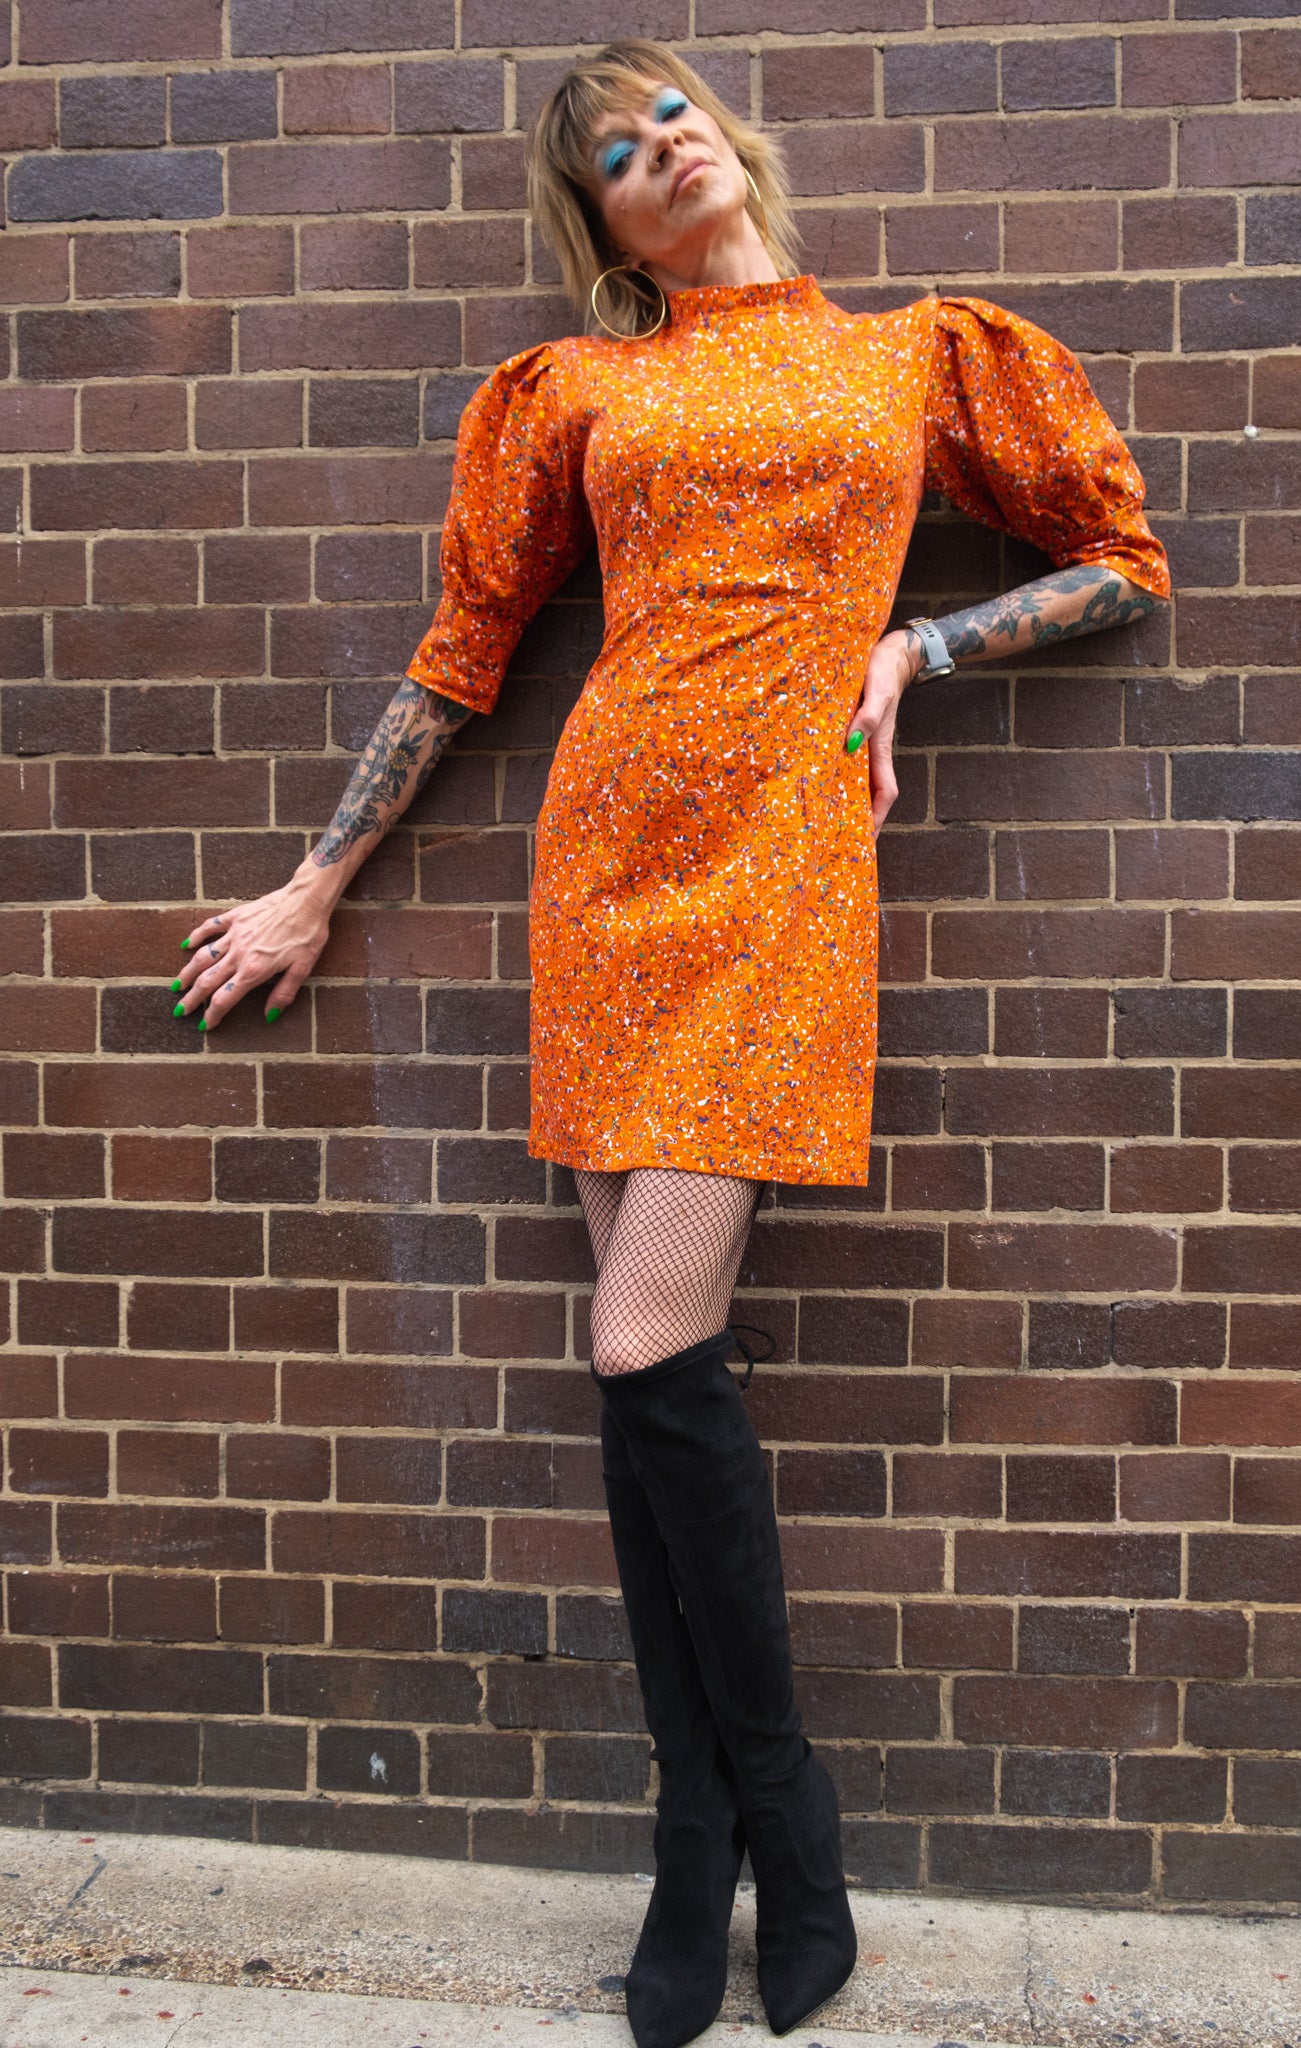 A model leaning against a brick wall wearing an orange high neck, puffy sleeves dress, and black knee-high boots. 